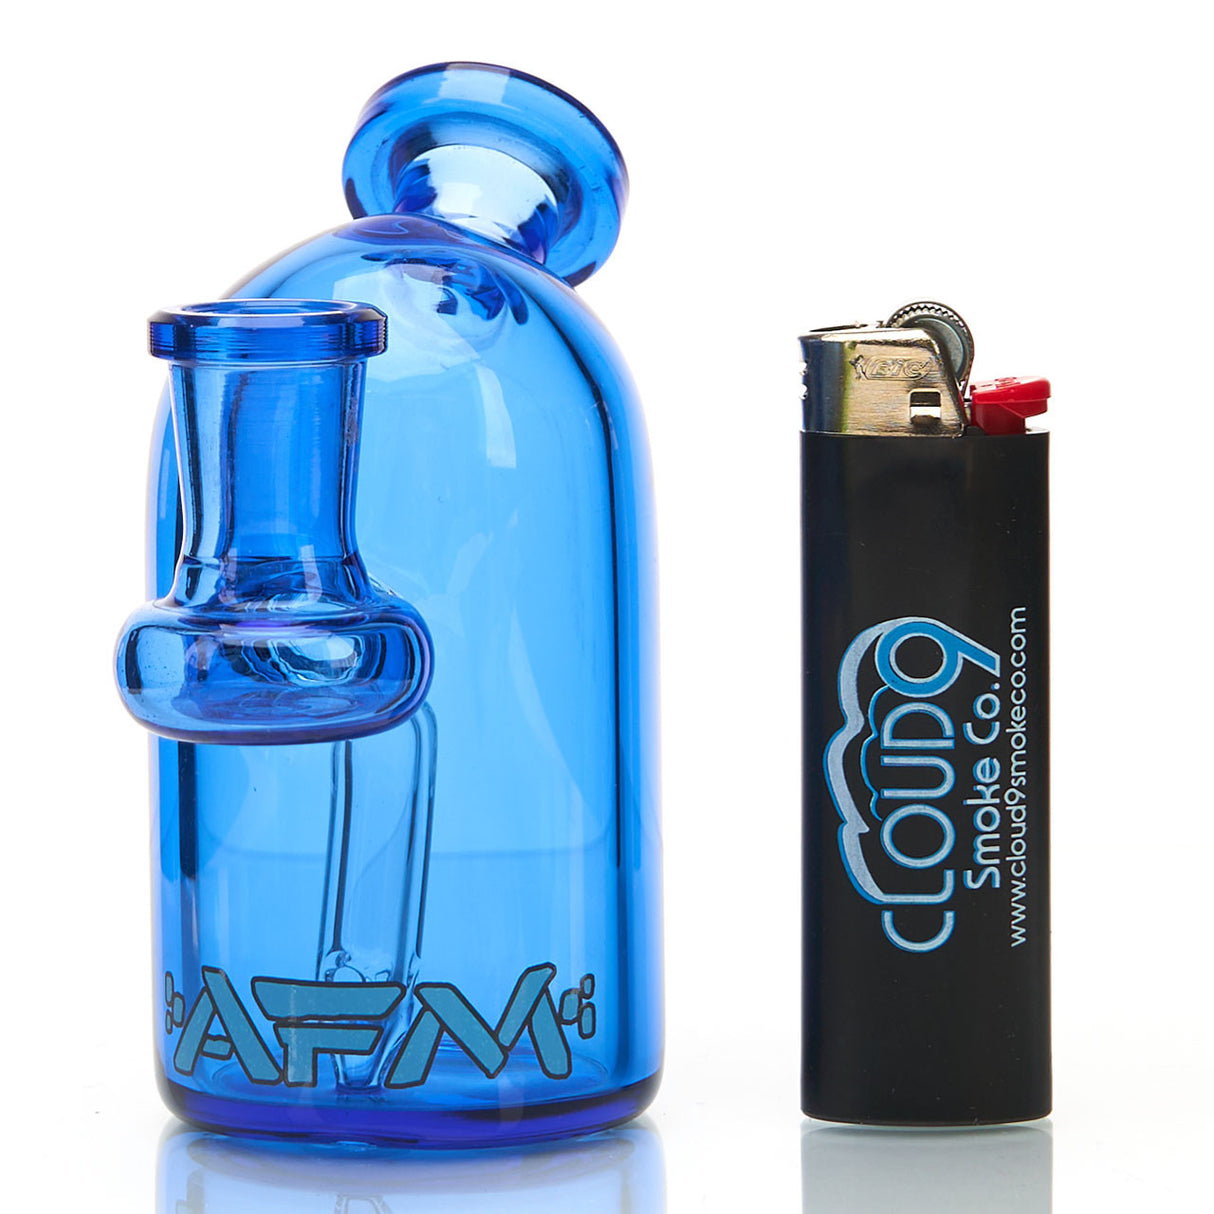 AFM Bullet Mini Concentrate Rig made from full color 4mm Borosilicate Glass. Available in full color blue.